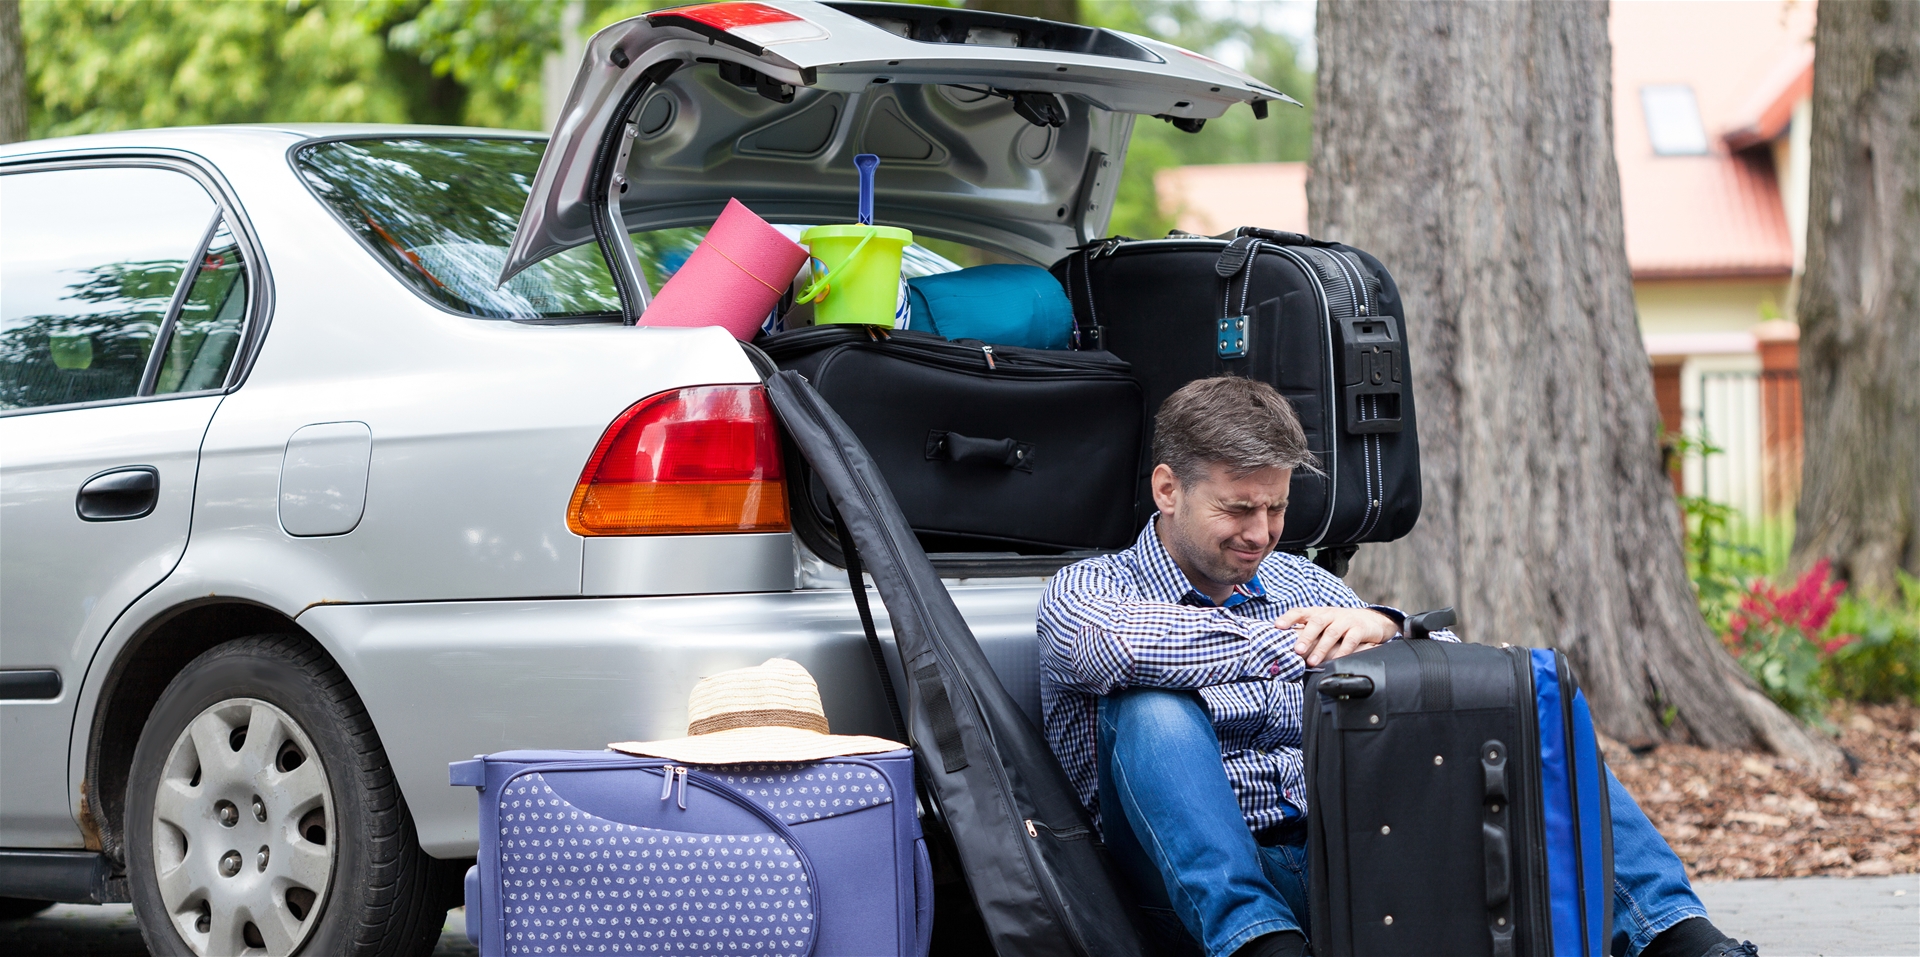 Man Frustrated With Packing Car